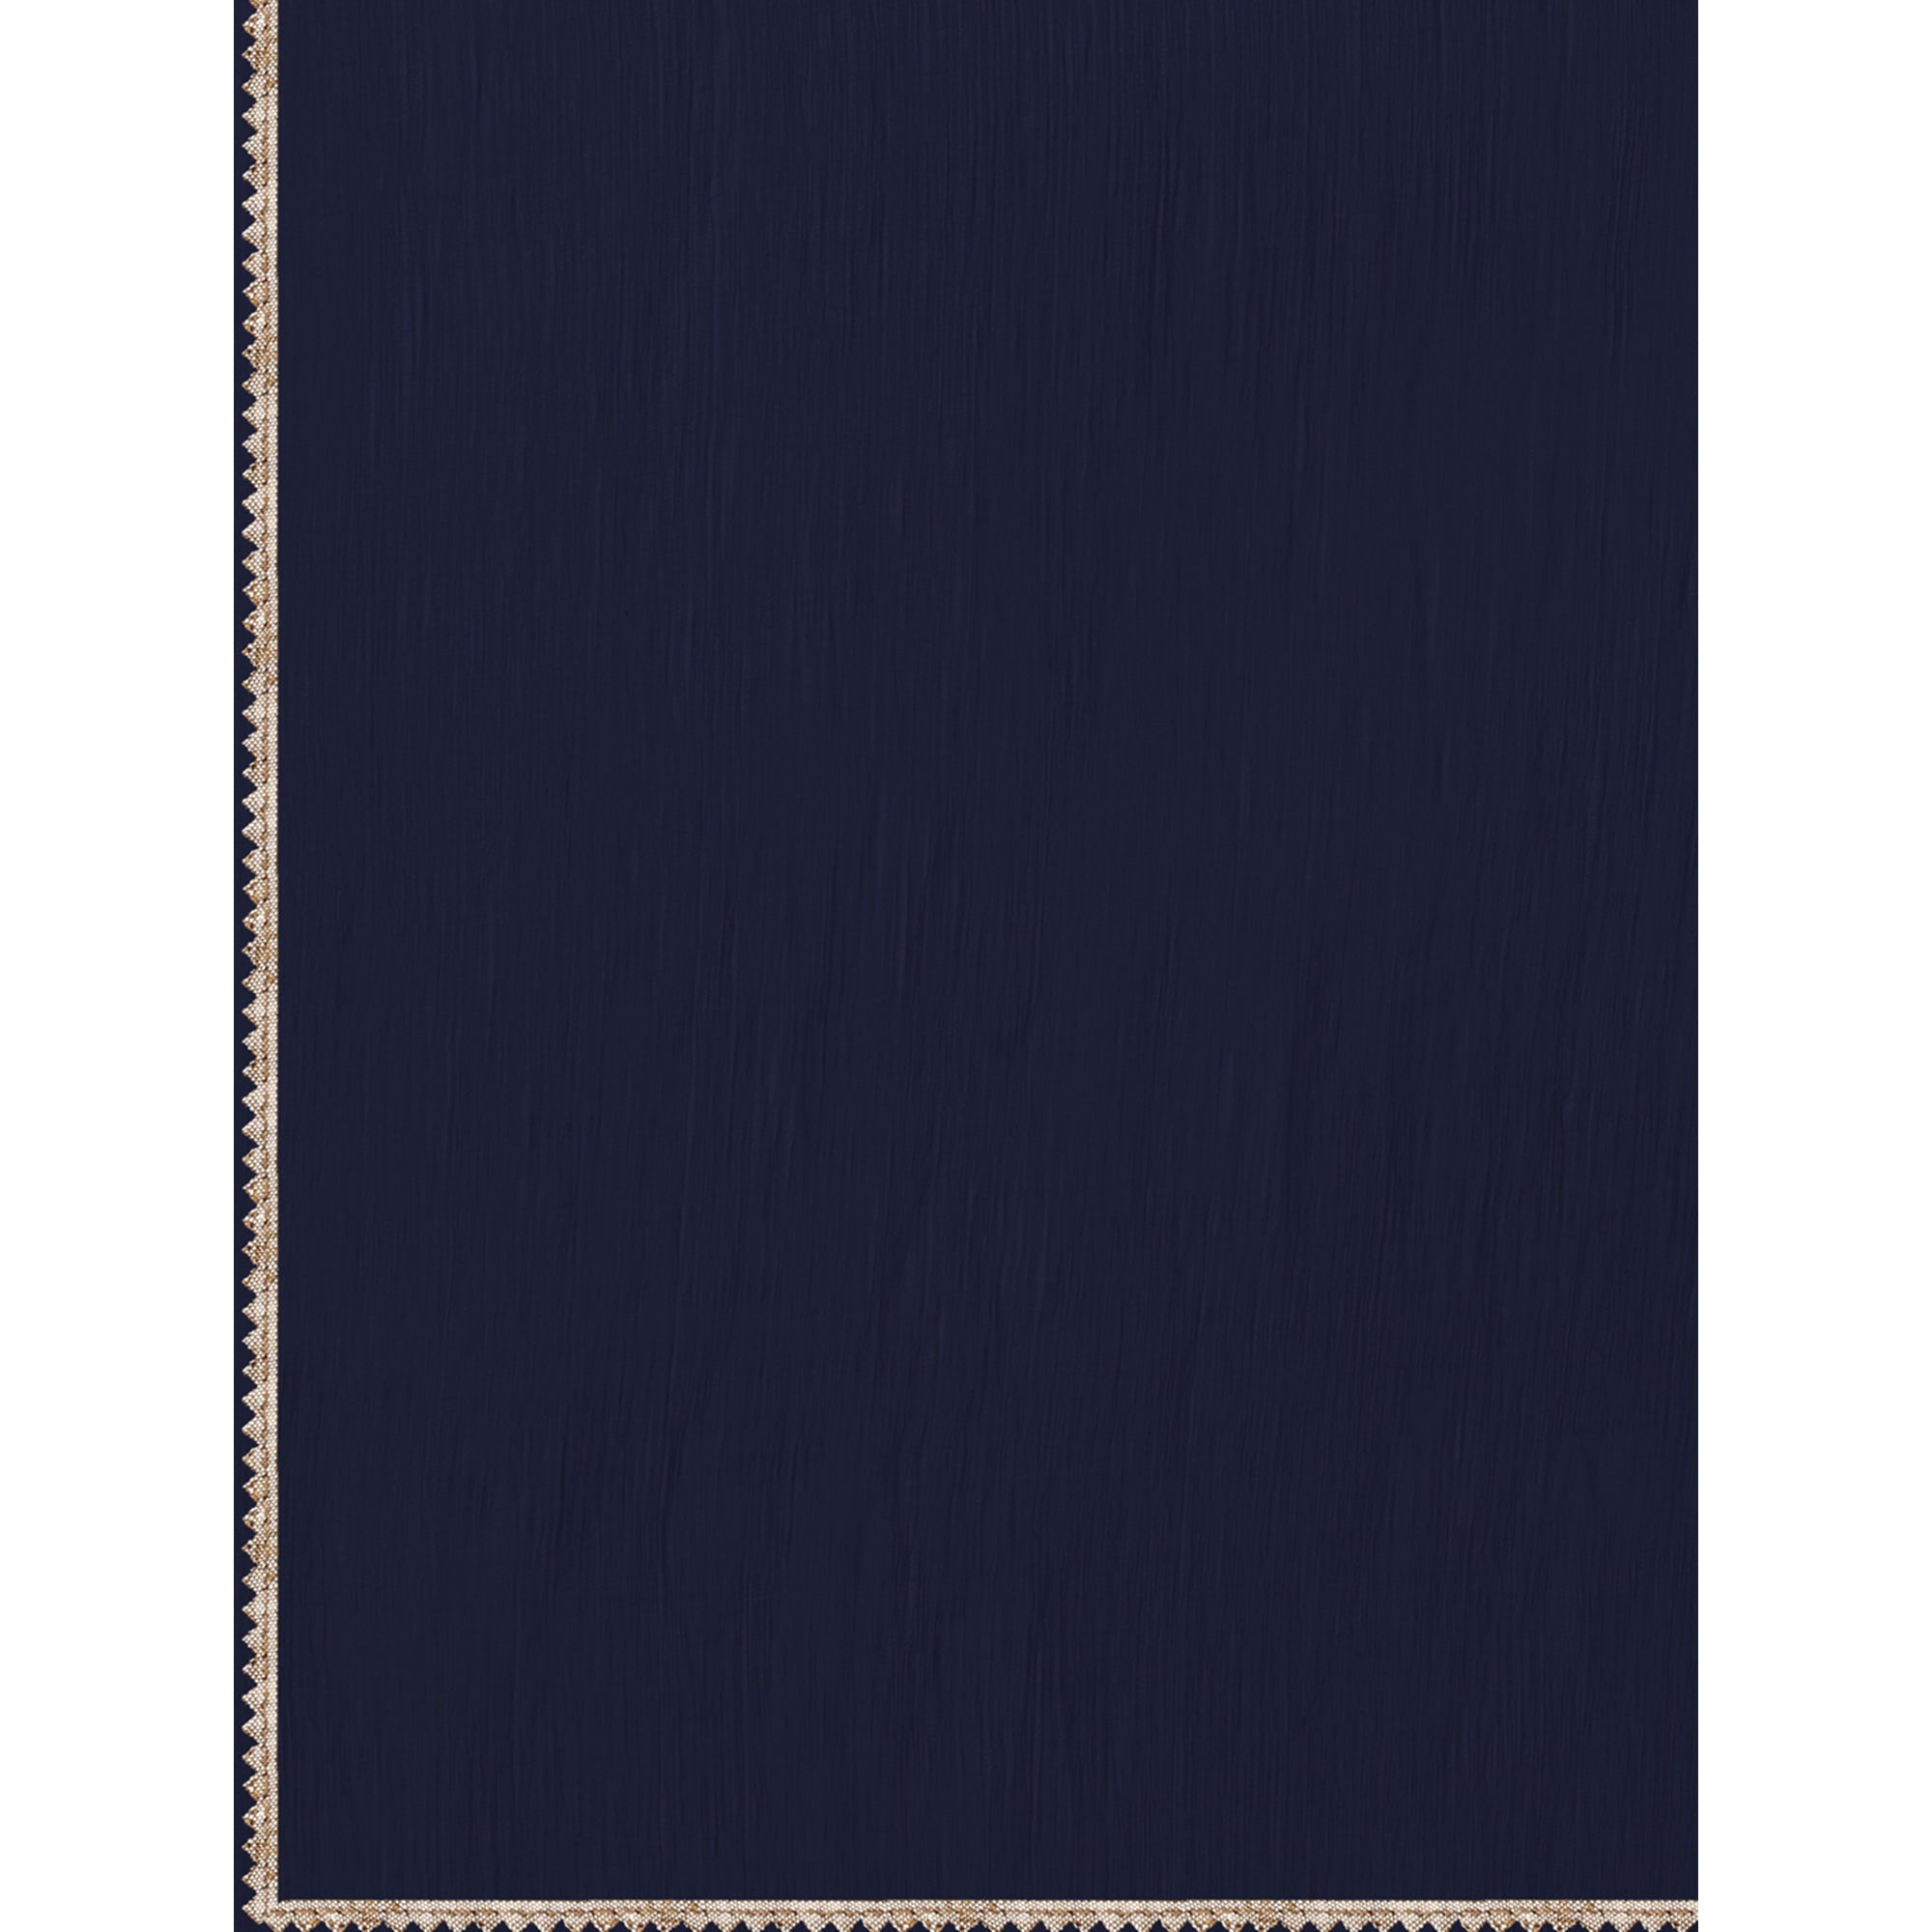 Navy Blue Embroidered Rayon Salwar Suit